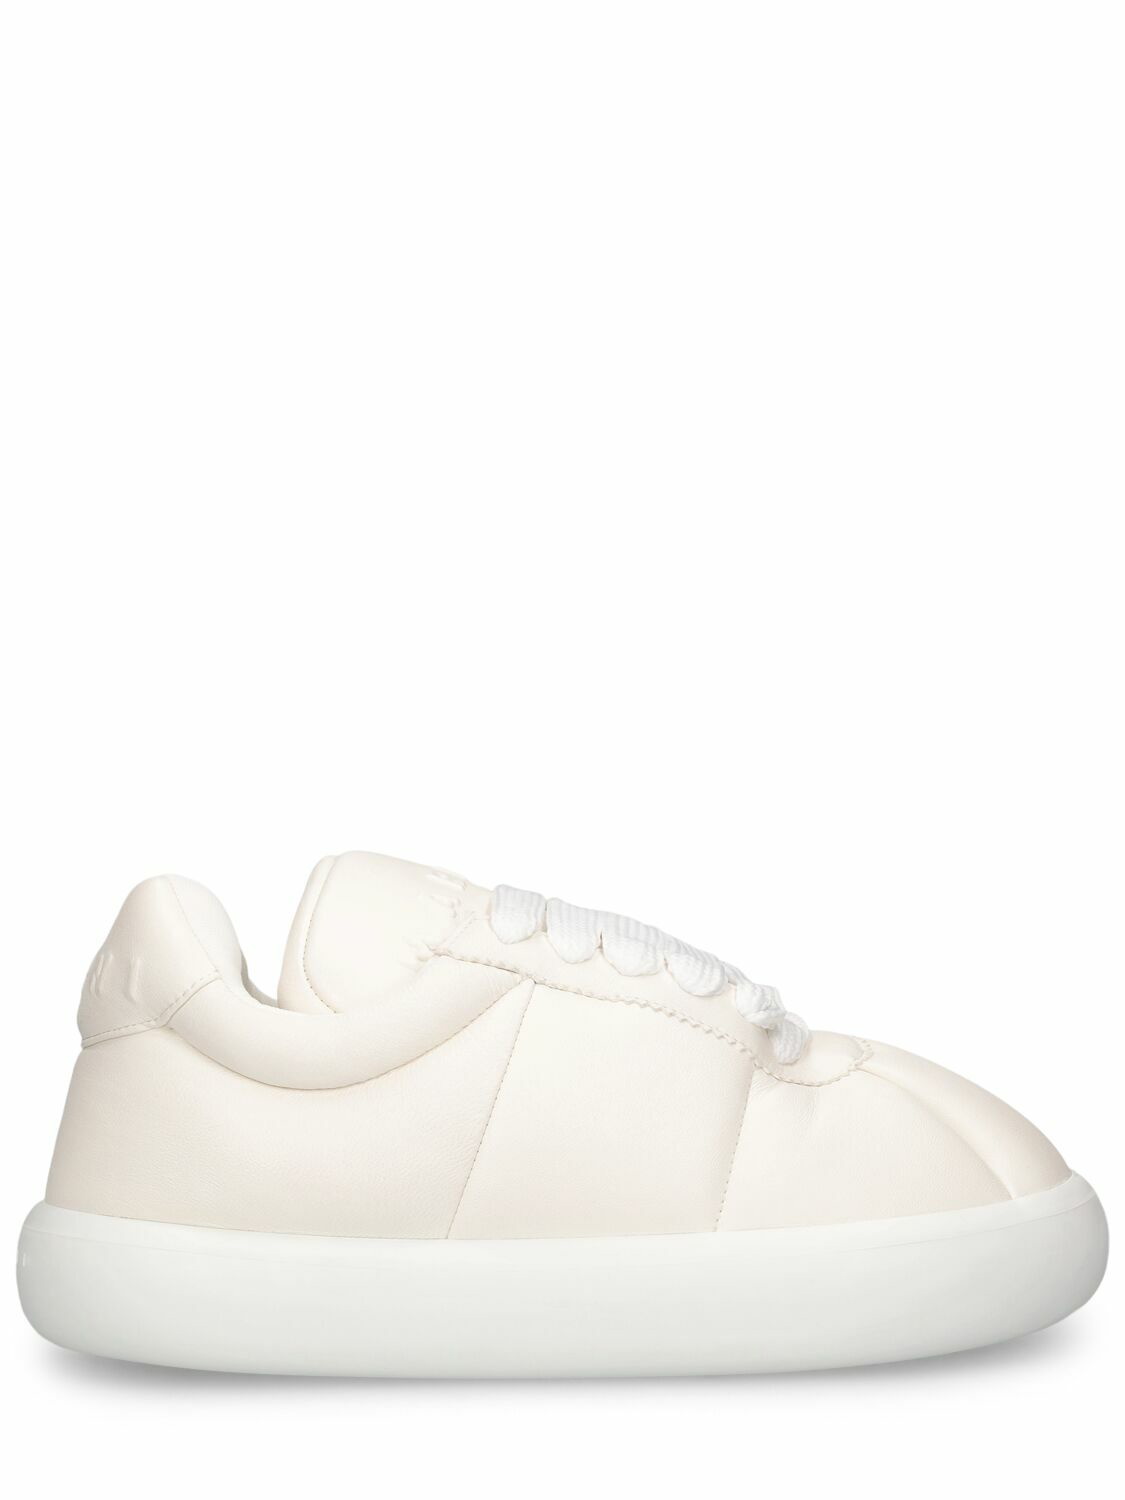 Photo: MARNI - Chunky Soft Leather Low Top Sneakers